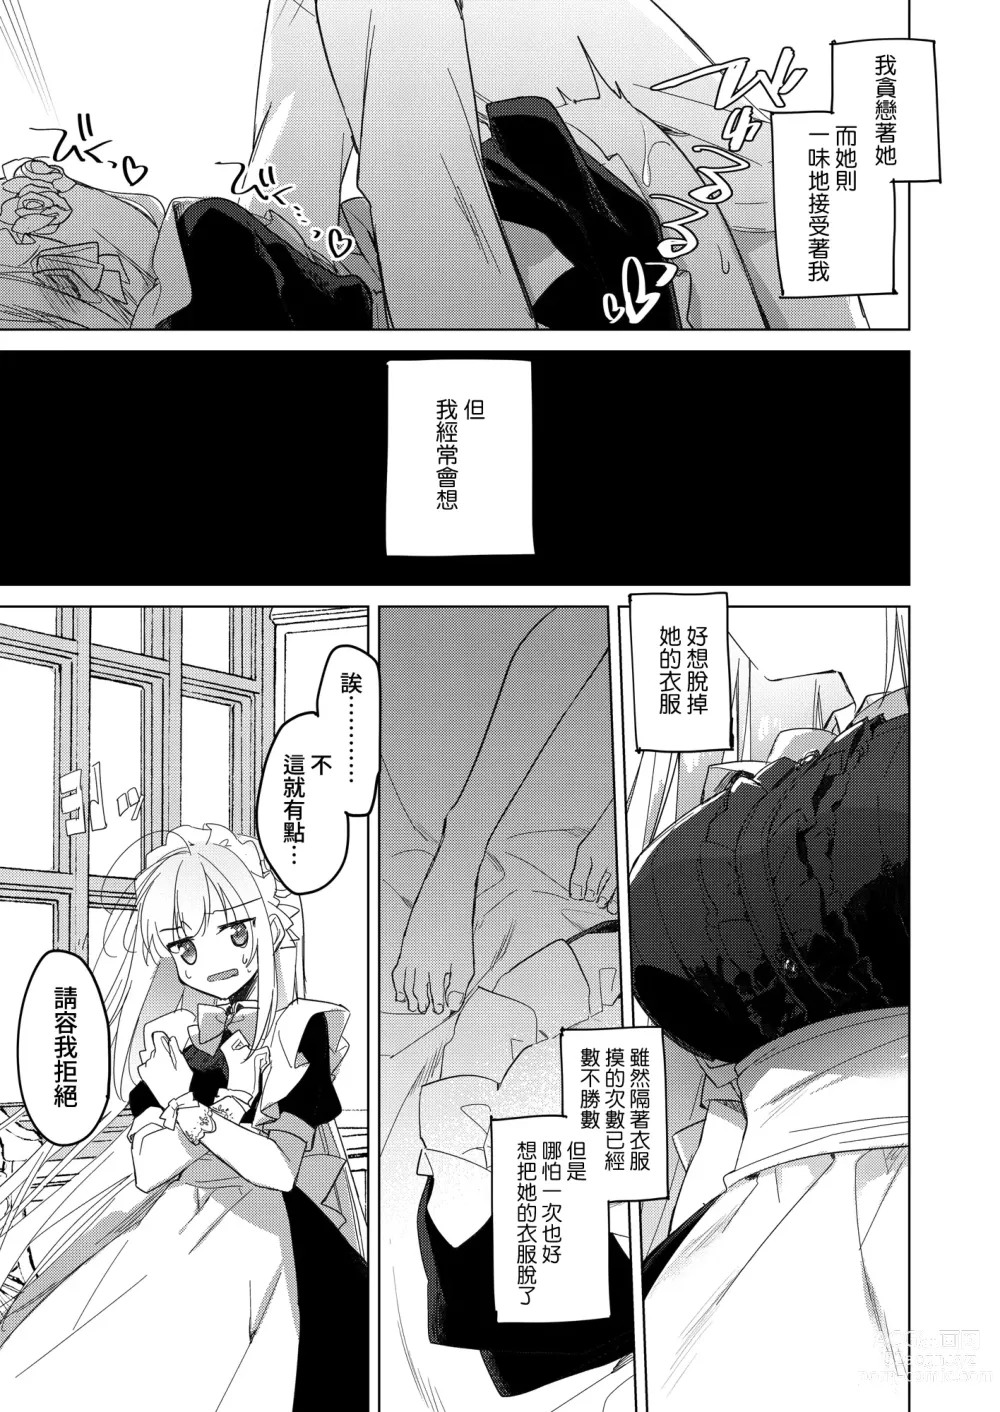 Page 15 of doujinshi 女僕之旅